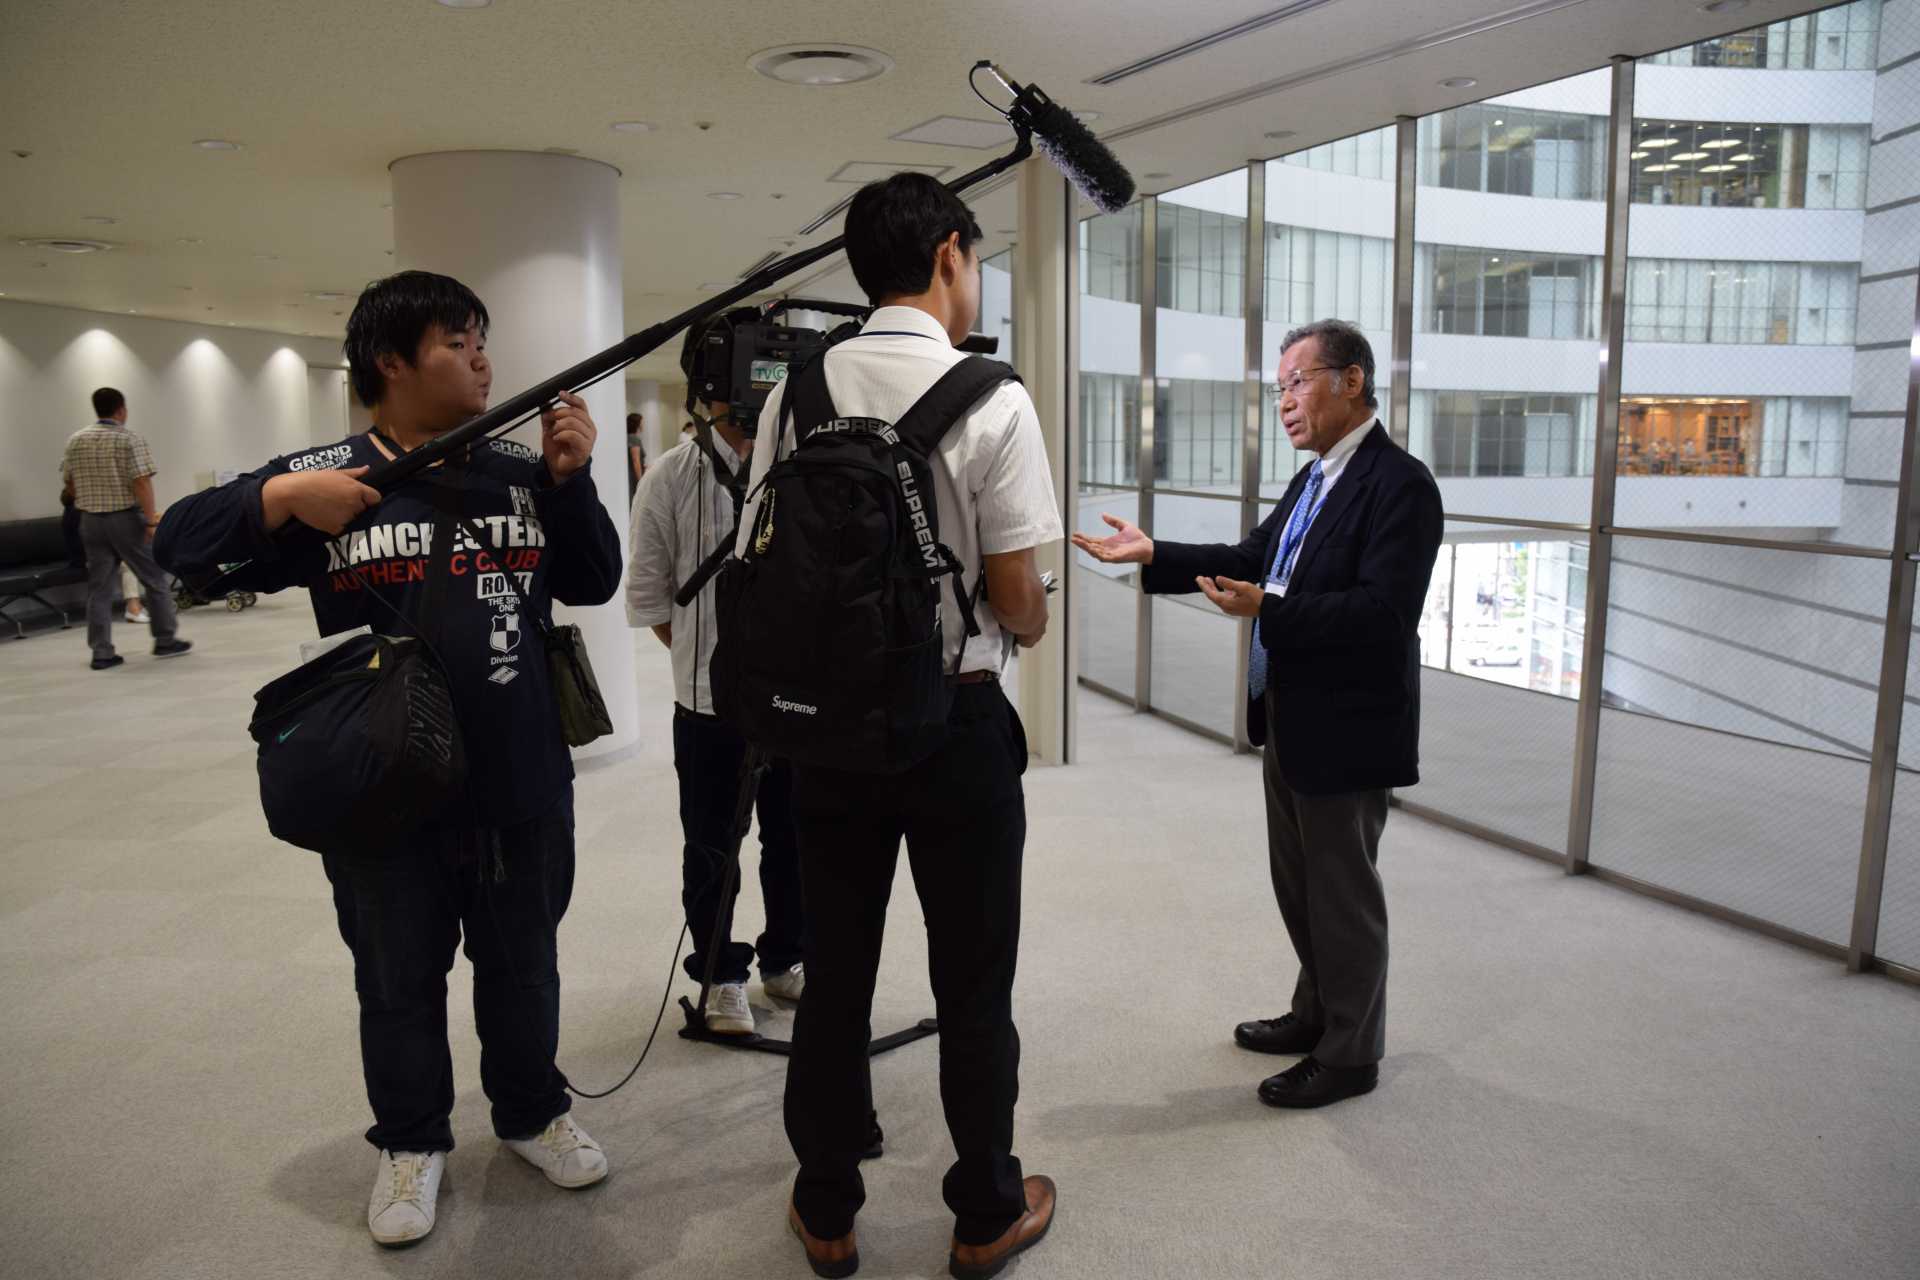 Shuichi Ono, President of the Sasakawa Peace Foundation, responding to local television interviews at the symposium venue. The media expressed great interest in issues surrounding aging